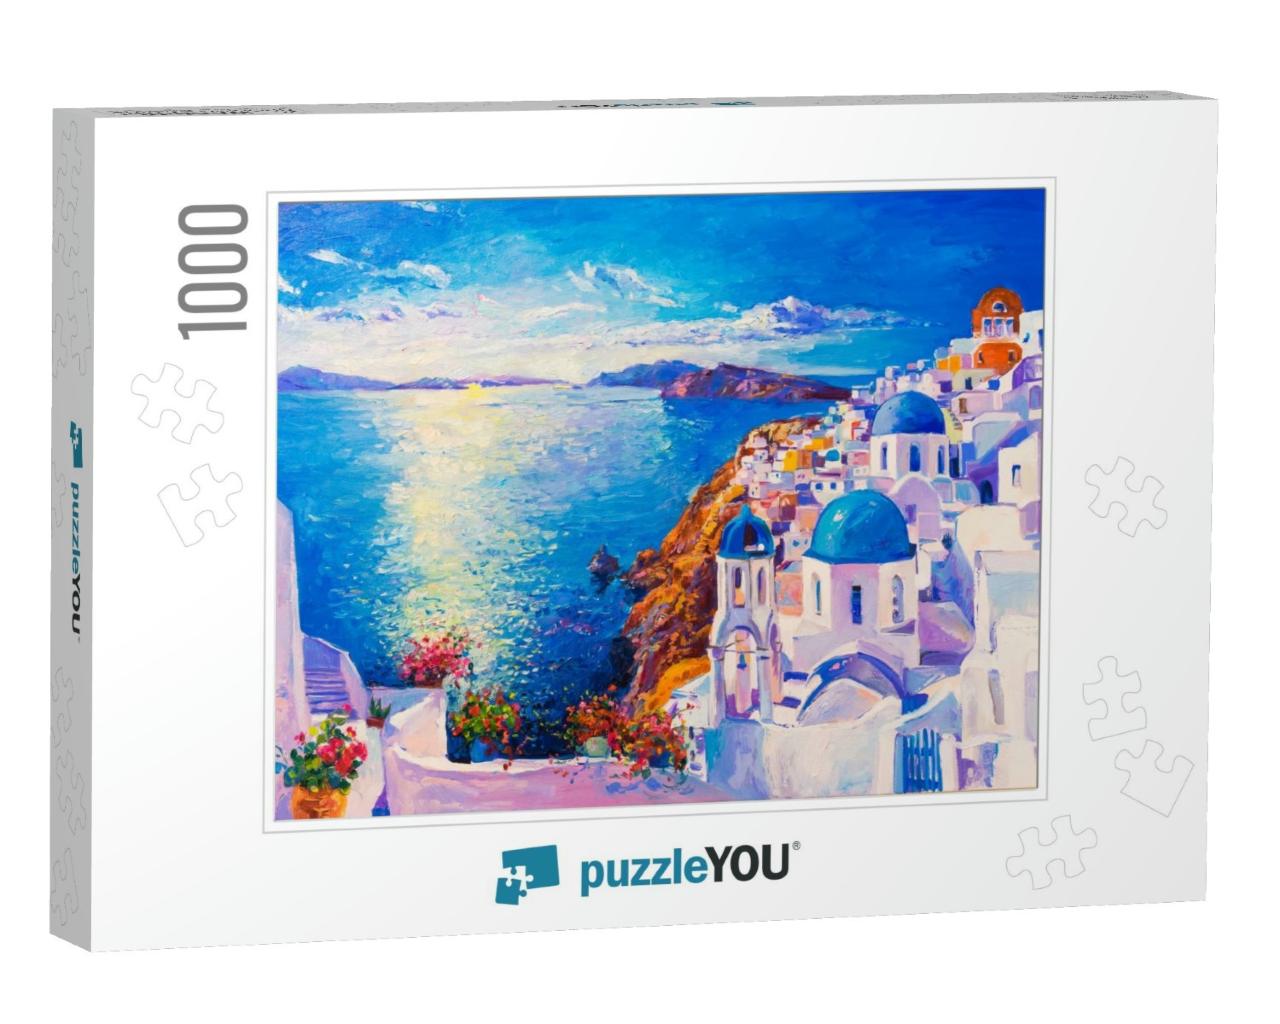 Original Oil Painting on Canvas. Blue Sea & White Houses... Jigsaw Puzzle with 1000 pieces